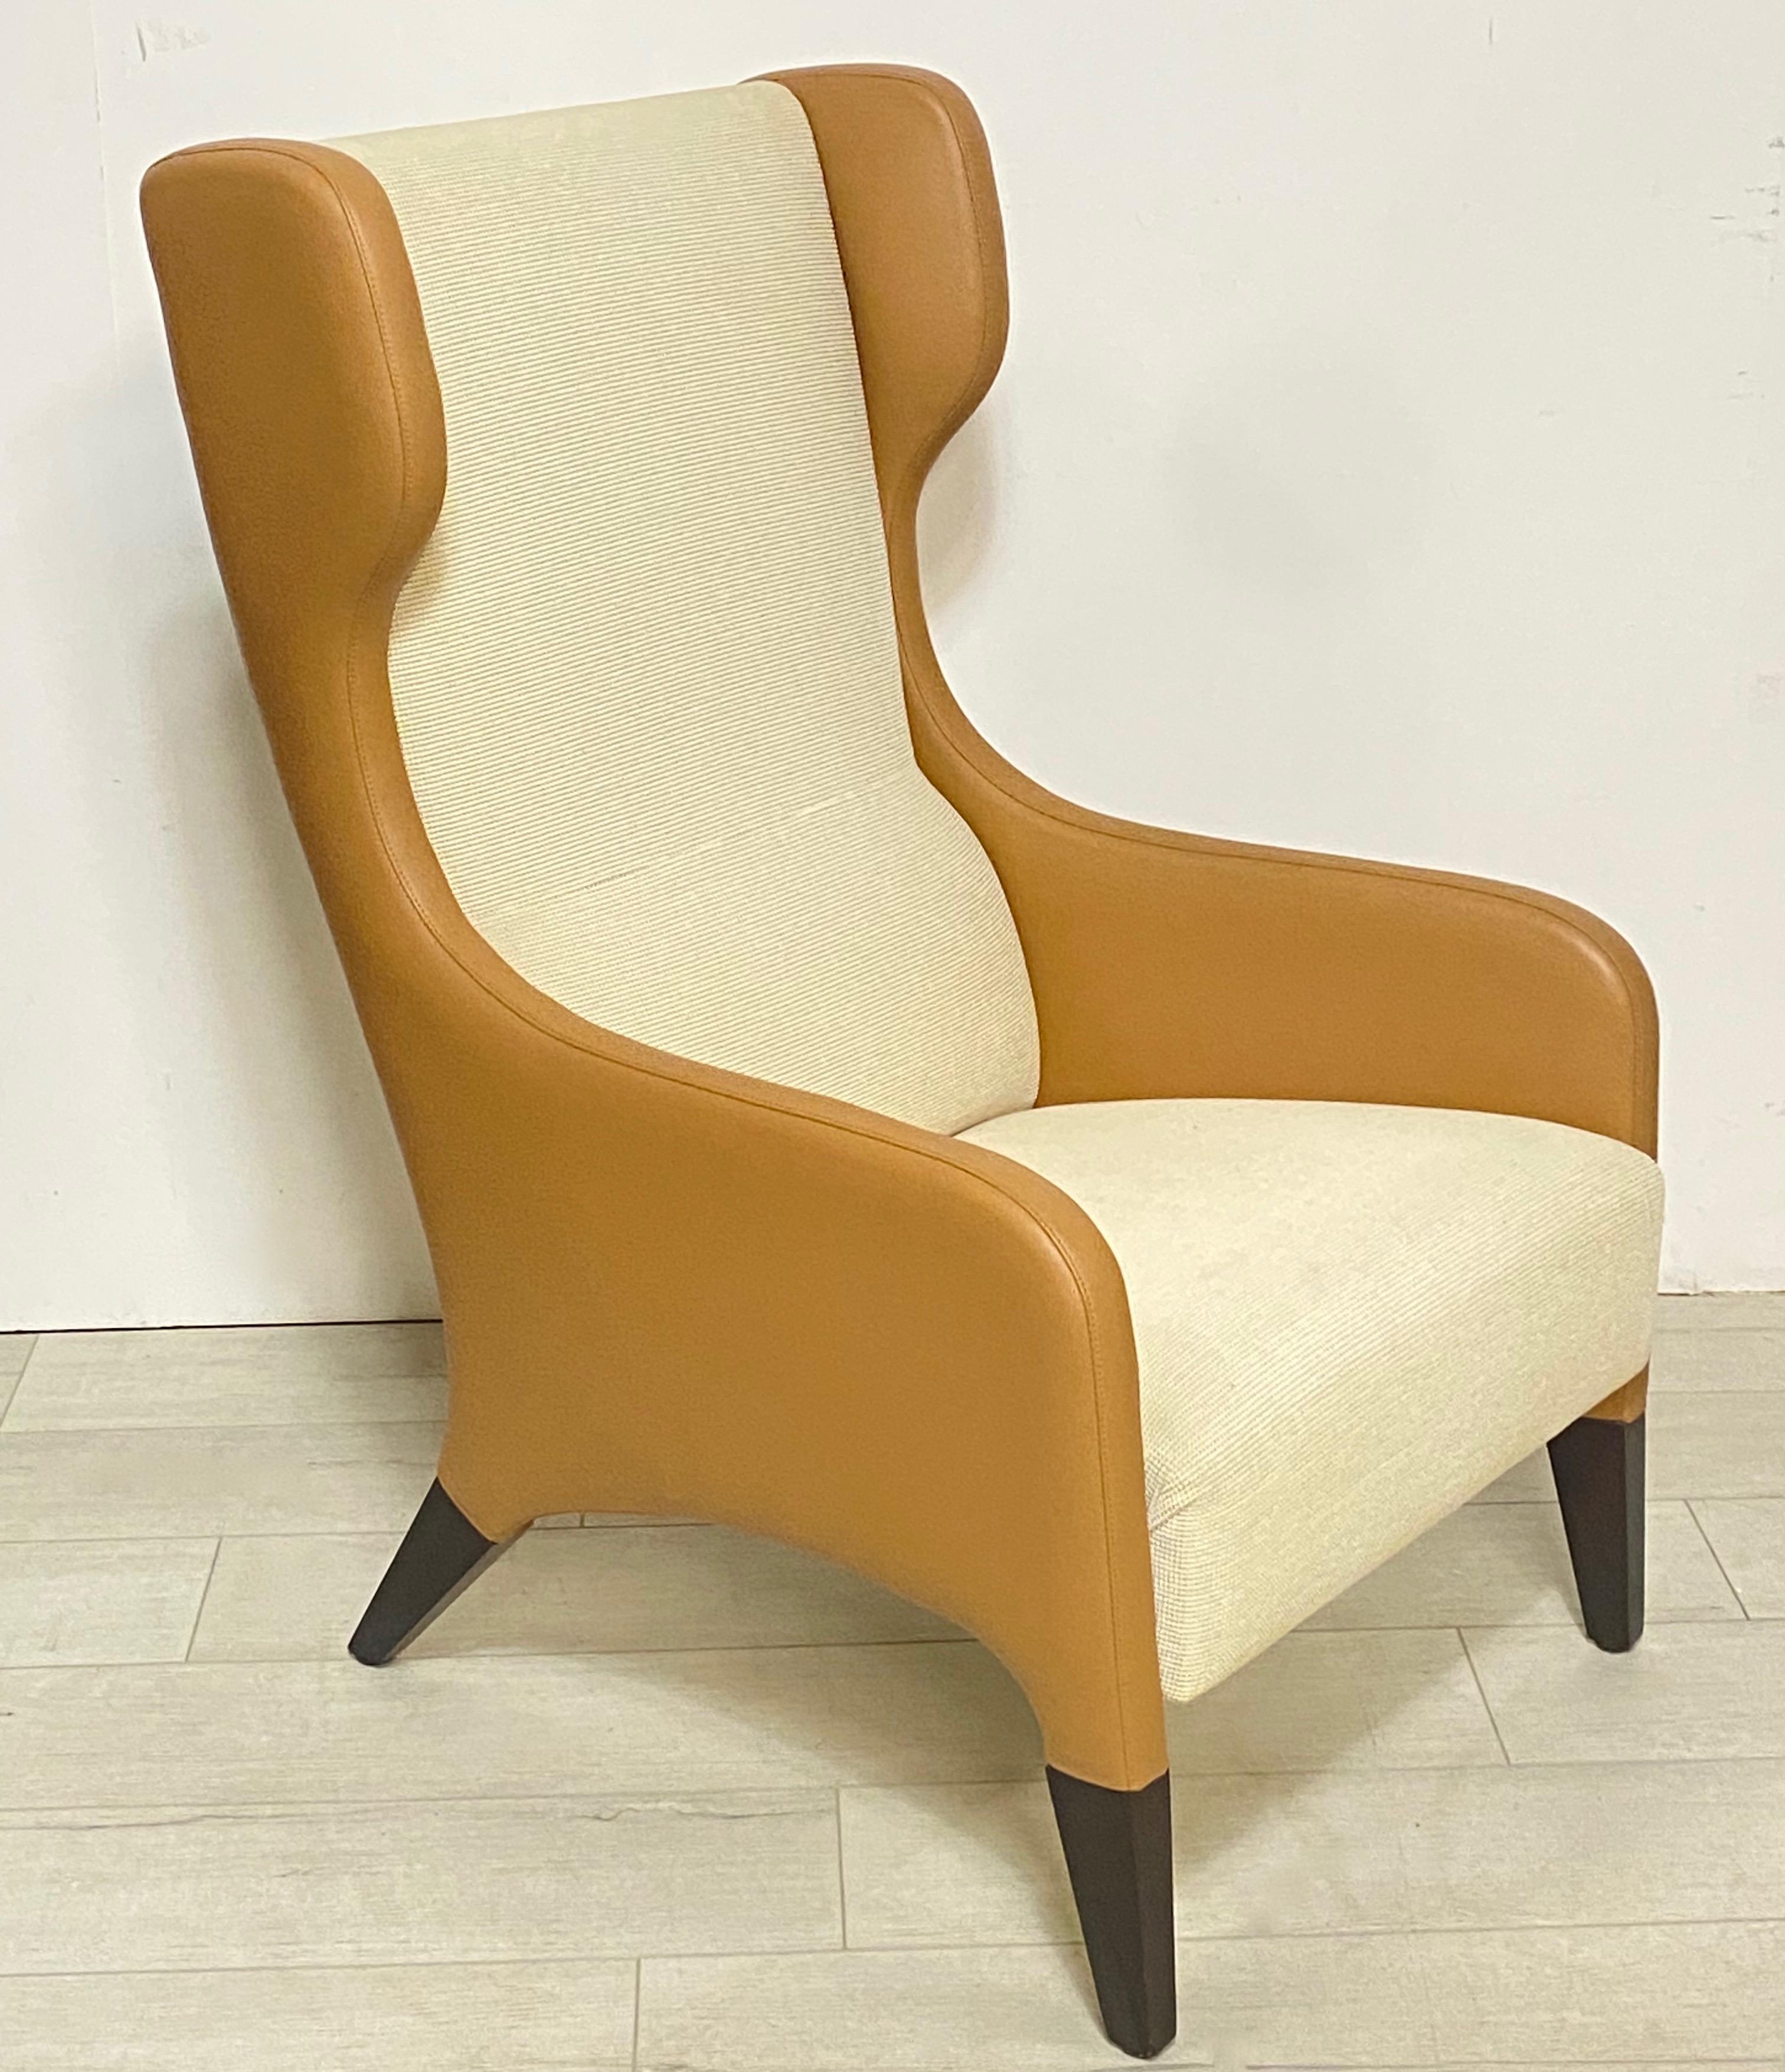 A pair of stylish and comfortable modern wingback chairs in the unique design style of Gio Ponti. Two-tone, tan leather with ivory color upholstery, and ebonized legs. 
Contemporary, late 20th century.
Measures: Height 41 inches
Width 26